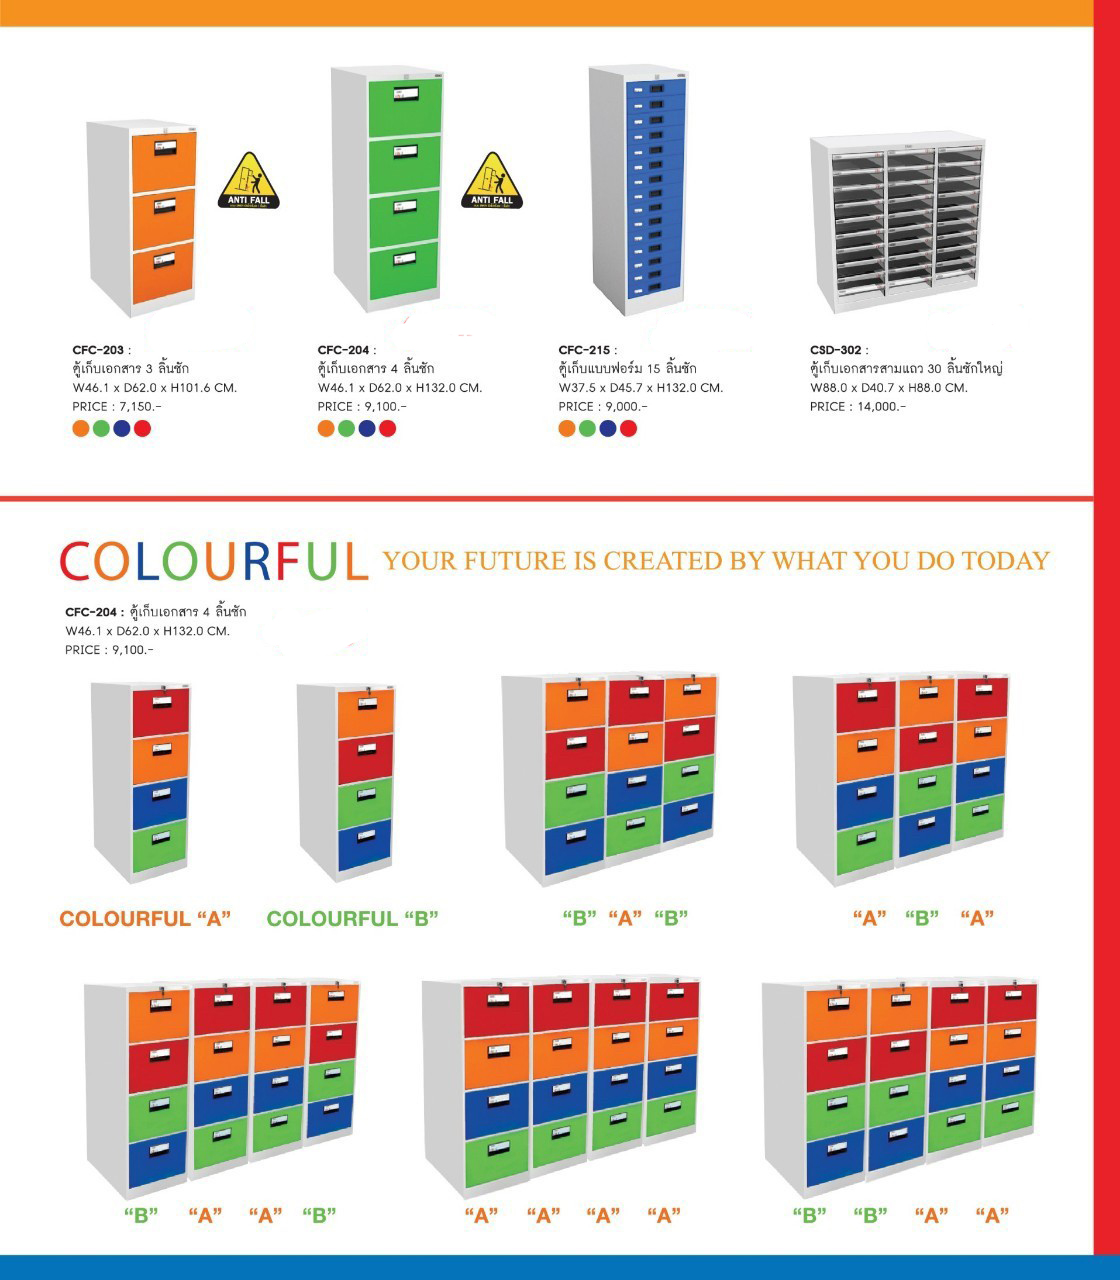 77021::CFC-203::A Sure steel cabinet with 3 drawers and key-locks. Dimension (WxDxH) cm : 46.1x62x101.6. Available in Red, Orange, Blue and Green Metal Cabinets